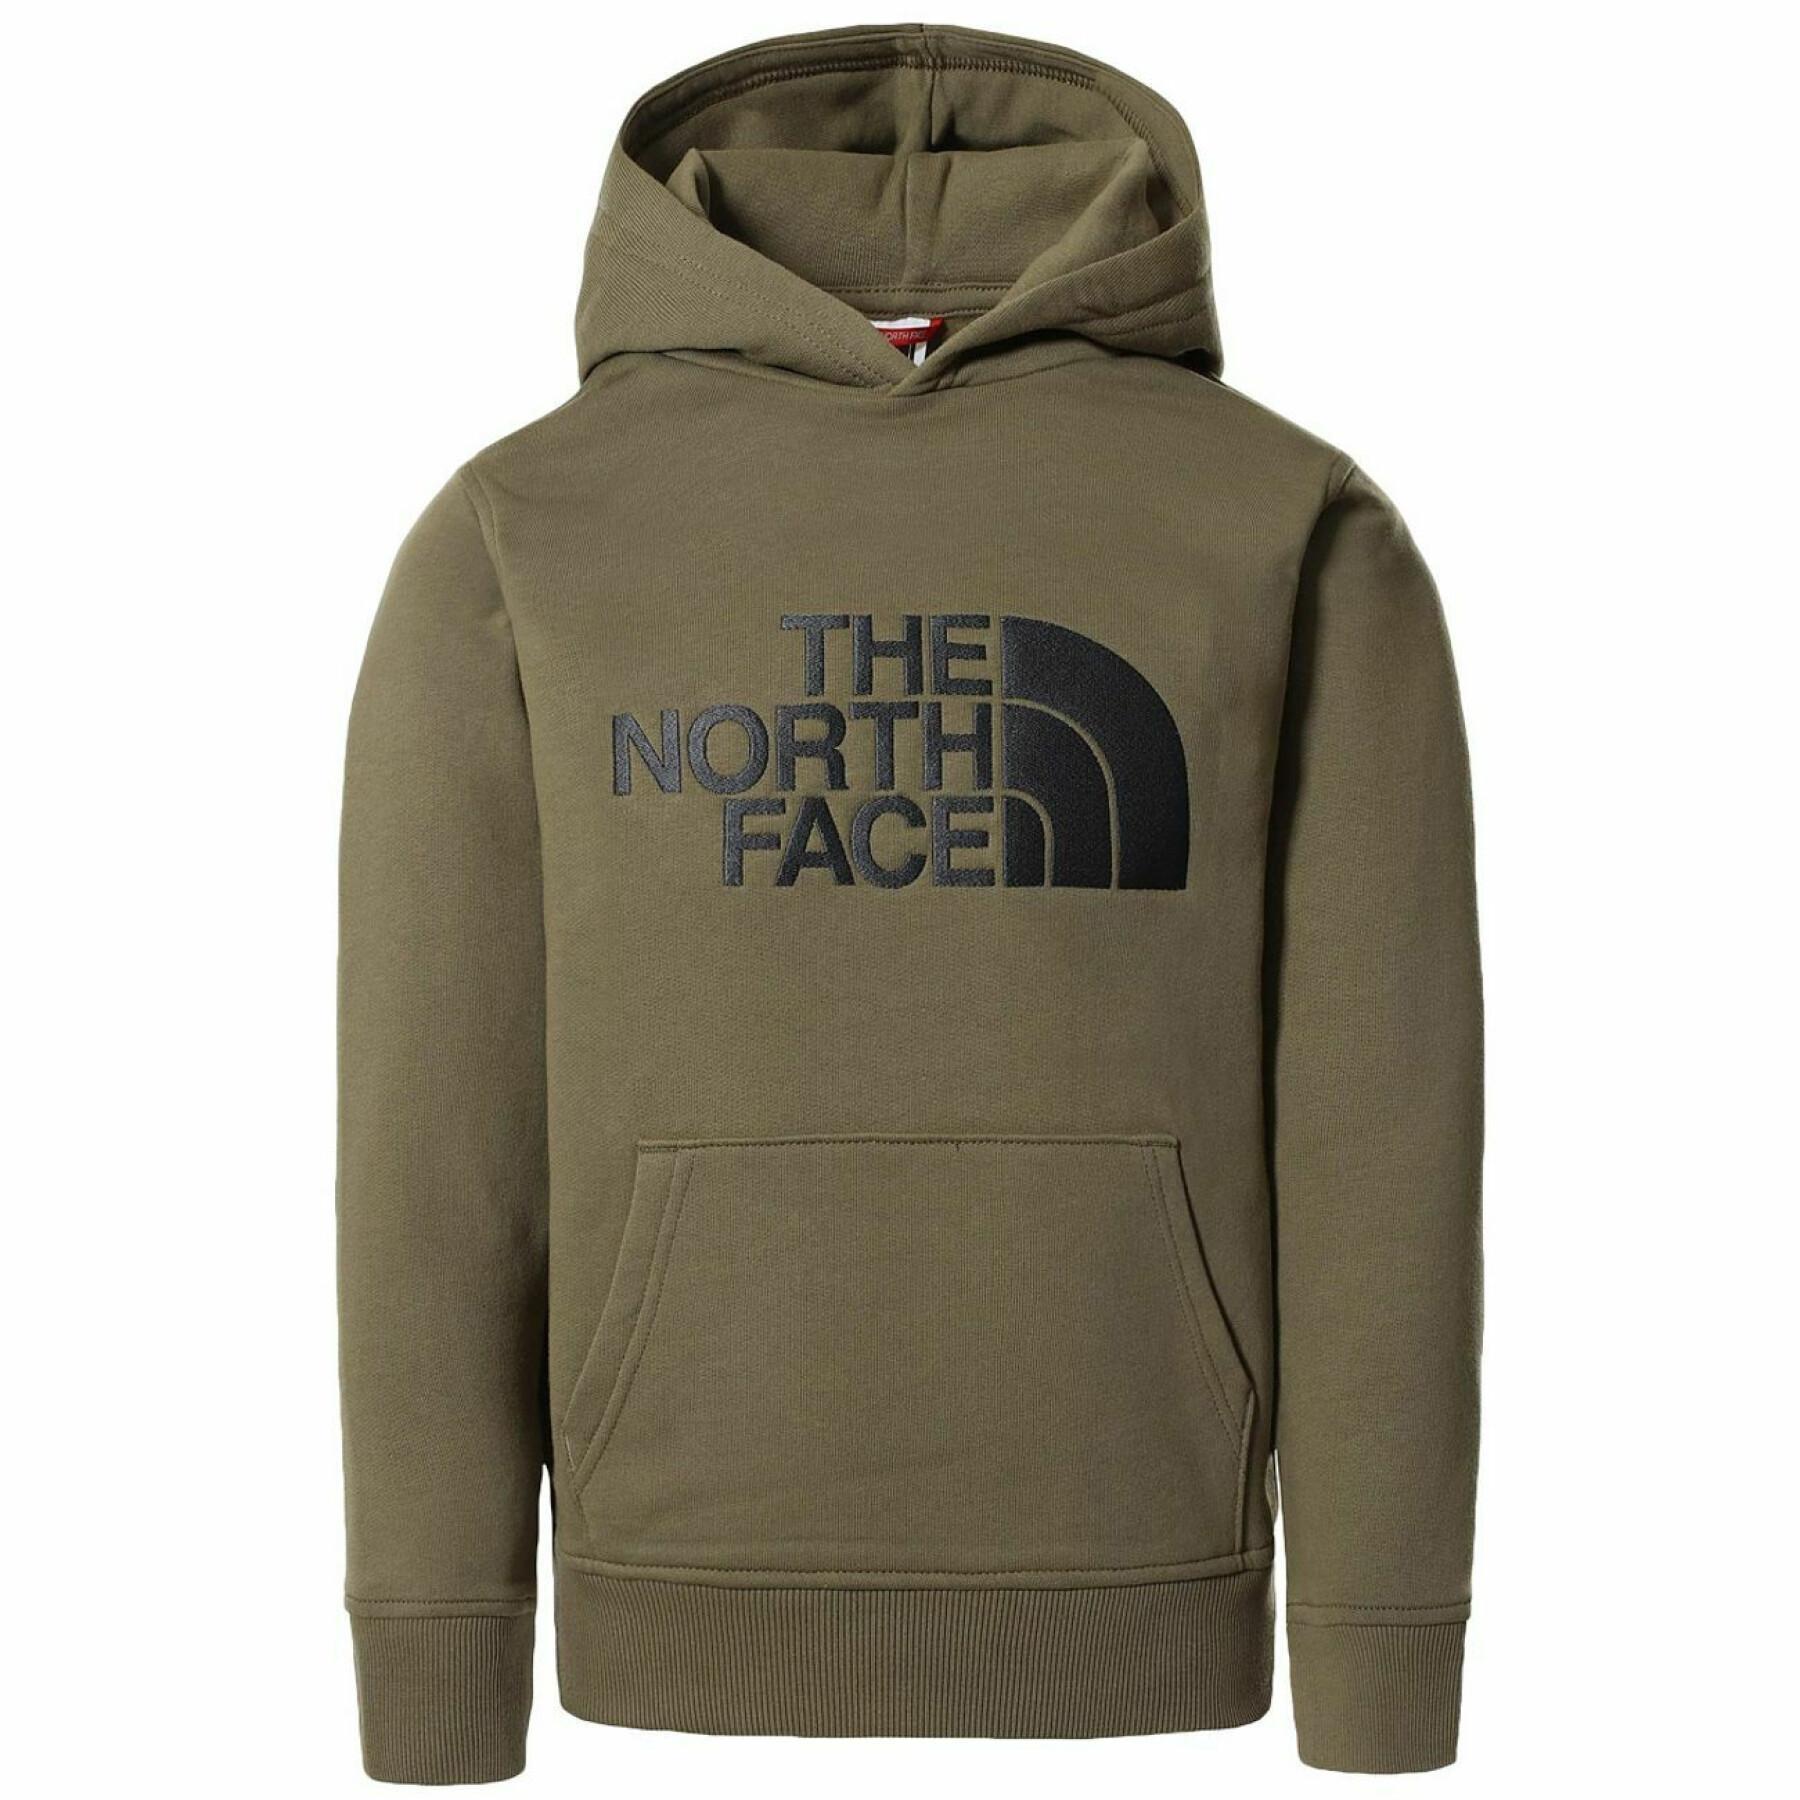 Hooded Sweetshirt The north Face Youth Drew Peak